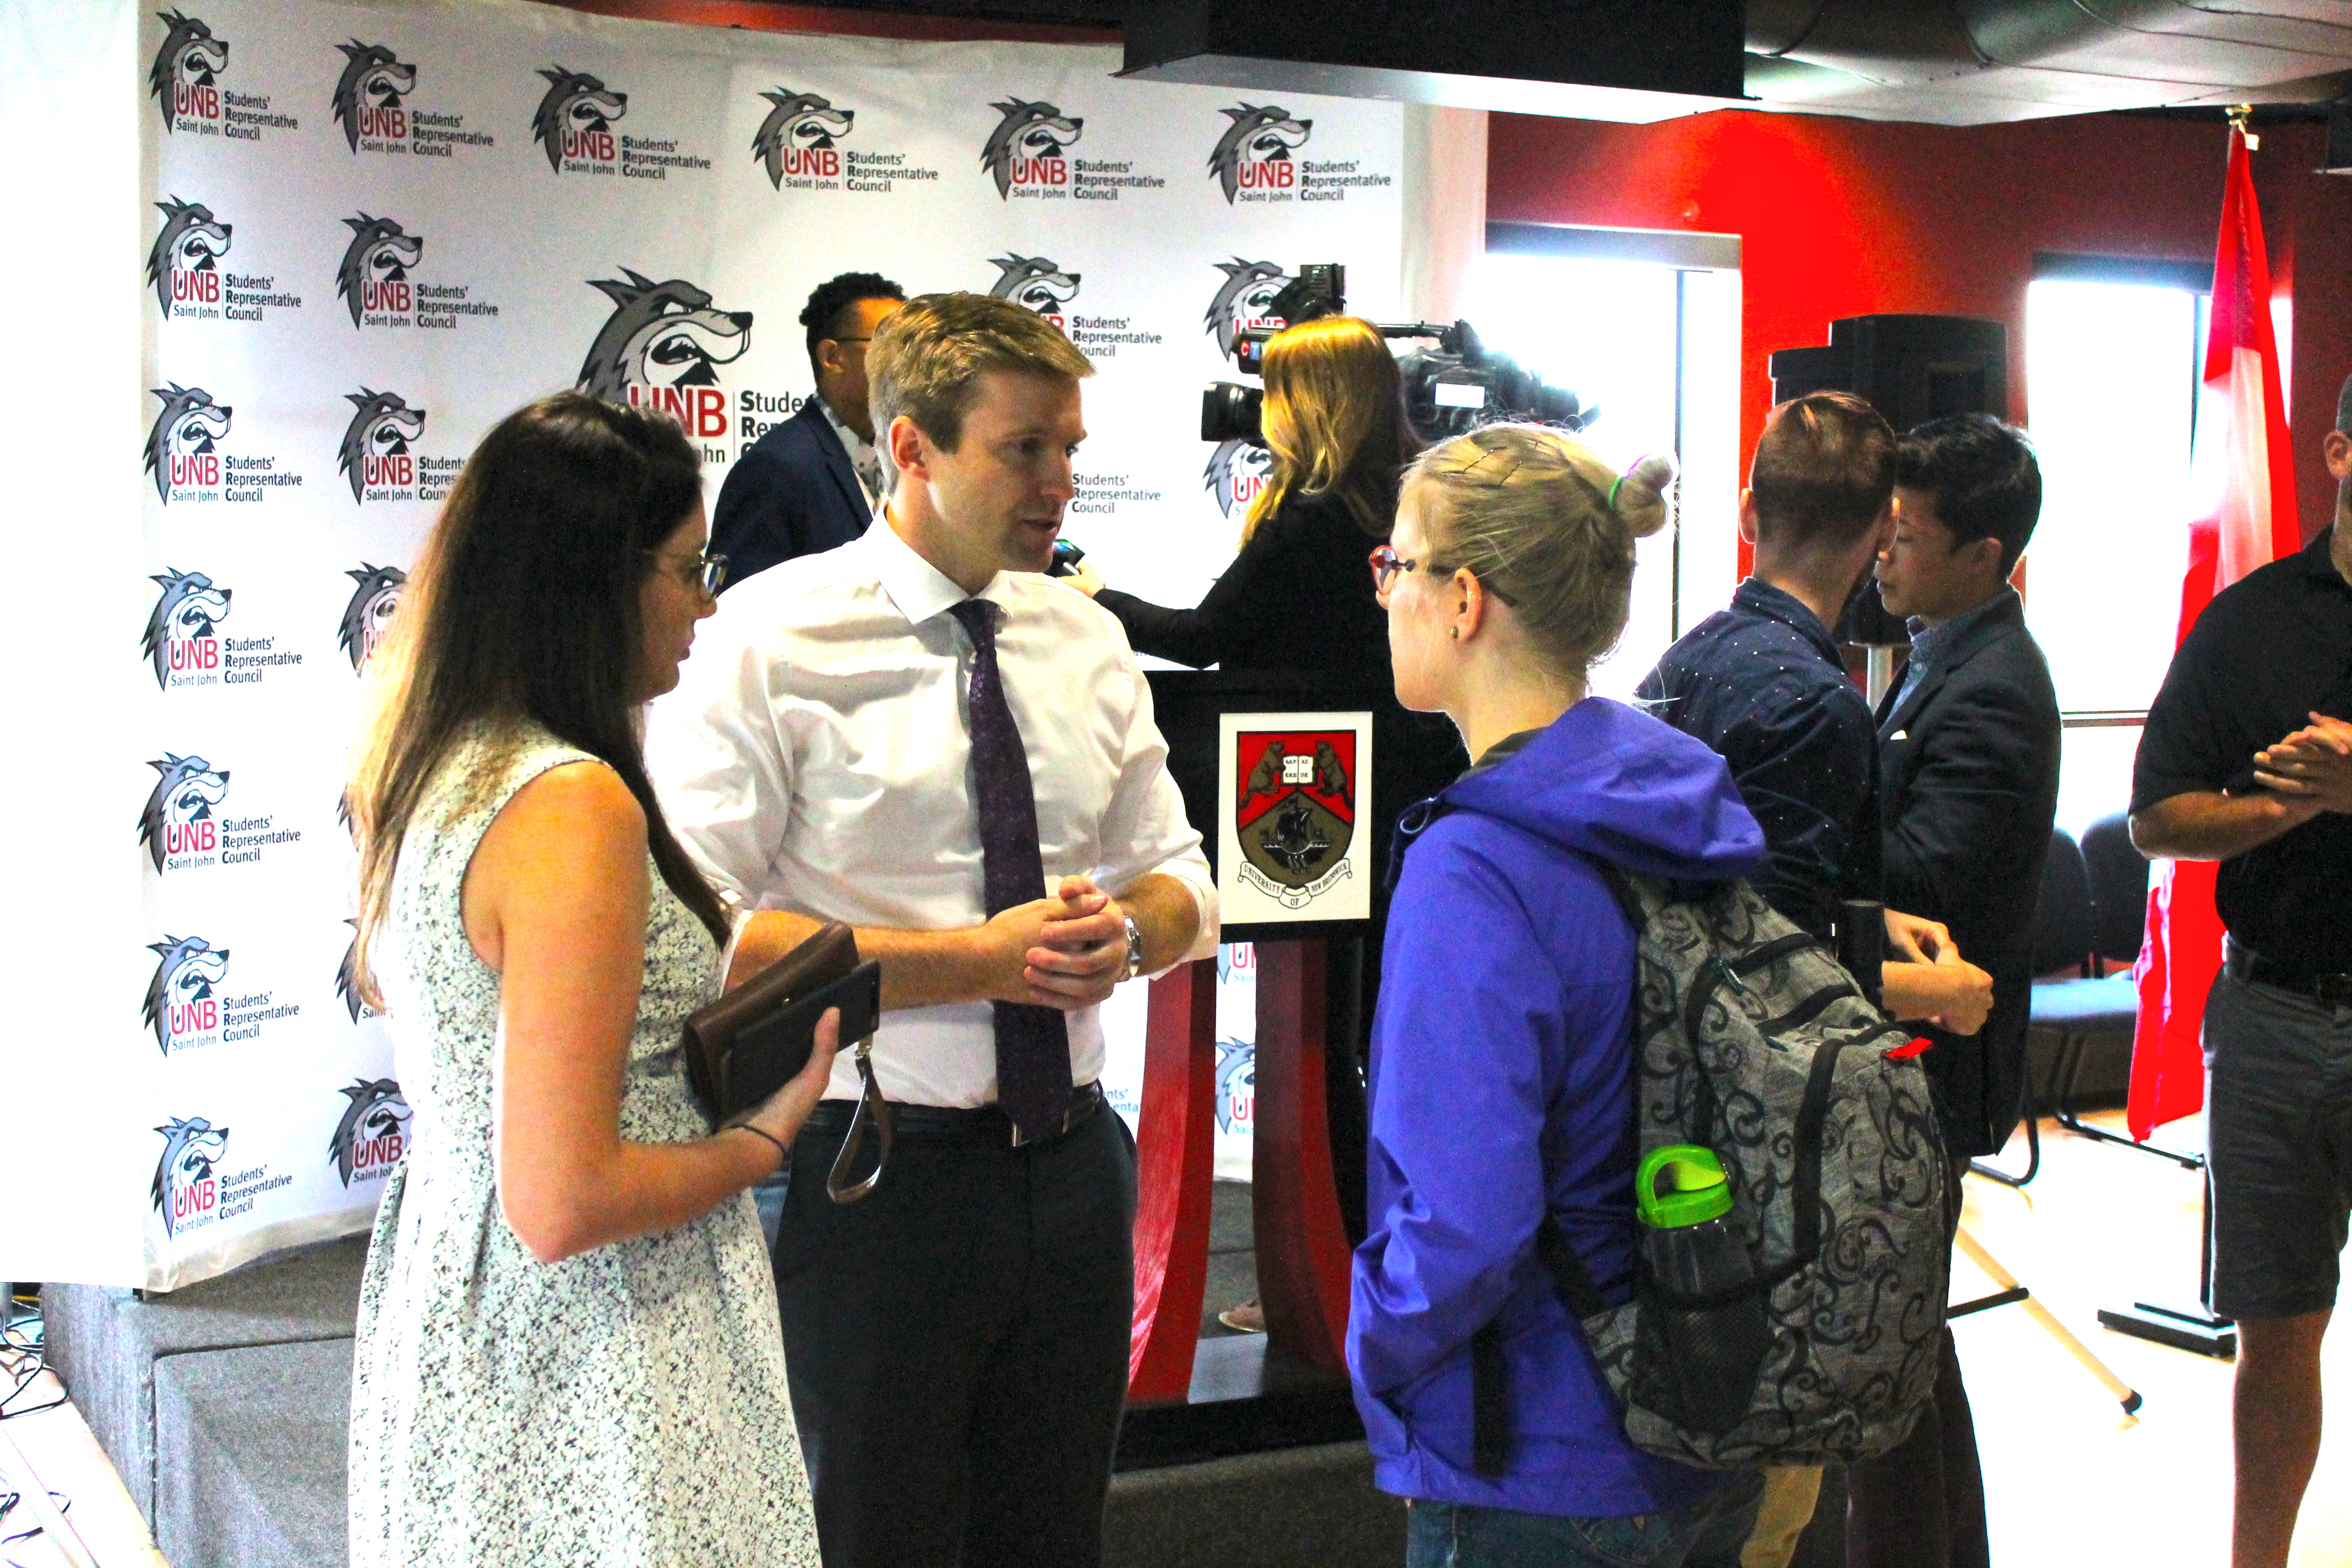 Students had a chance to meet with the Premier on Tuesday at the SRC's ConnectUNBSJ event. Photo: Nick Karimi